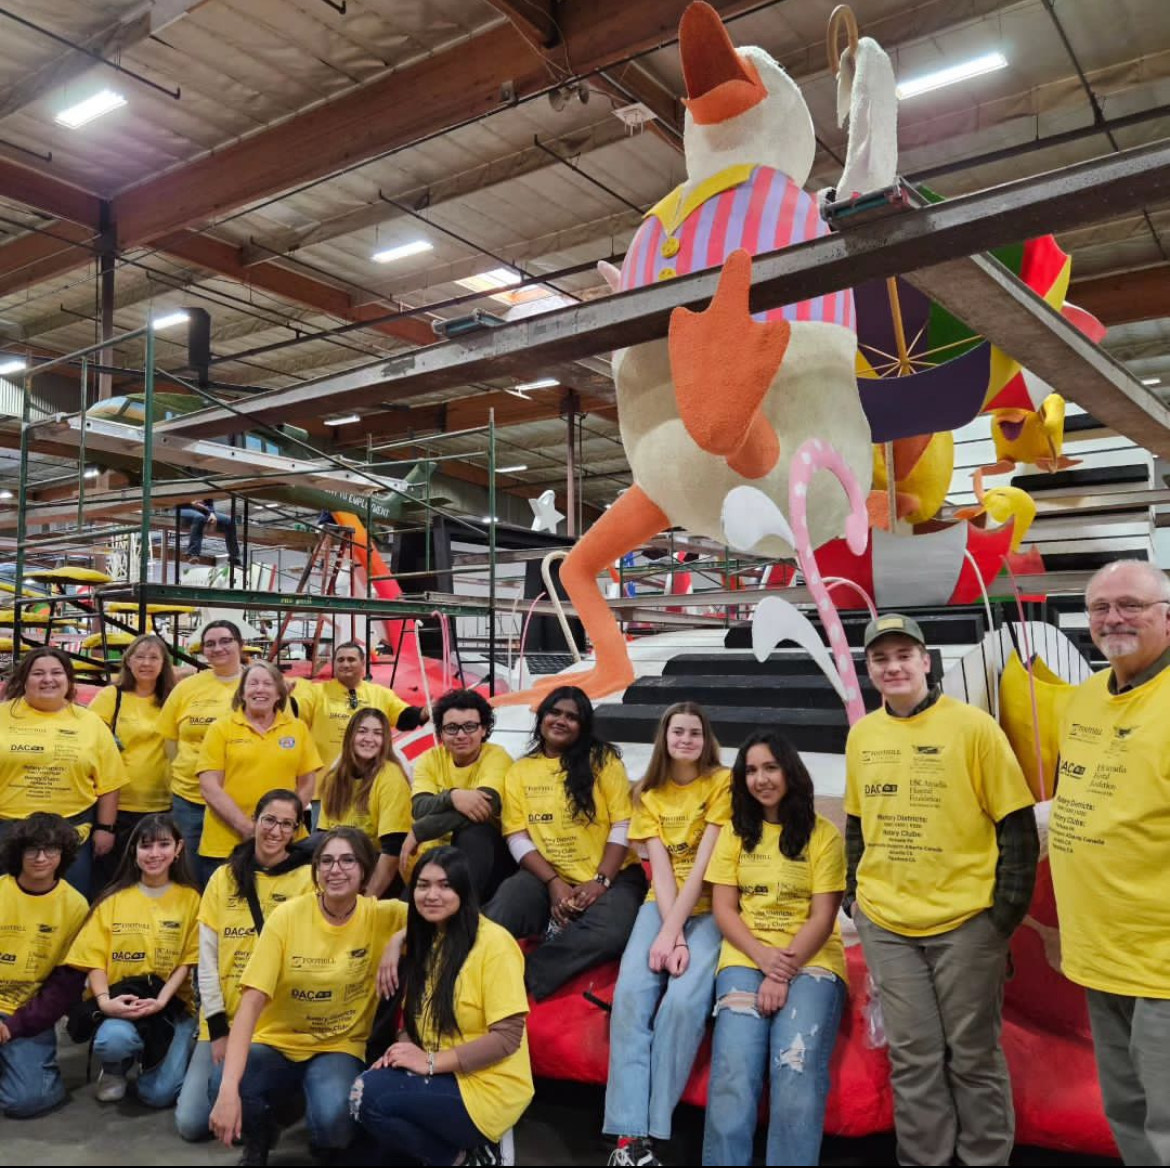 Burroughs Interact Club members, along with Rotarians and other Interactors, pose with the Rotary Rose Parade float that they helped create.